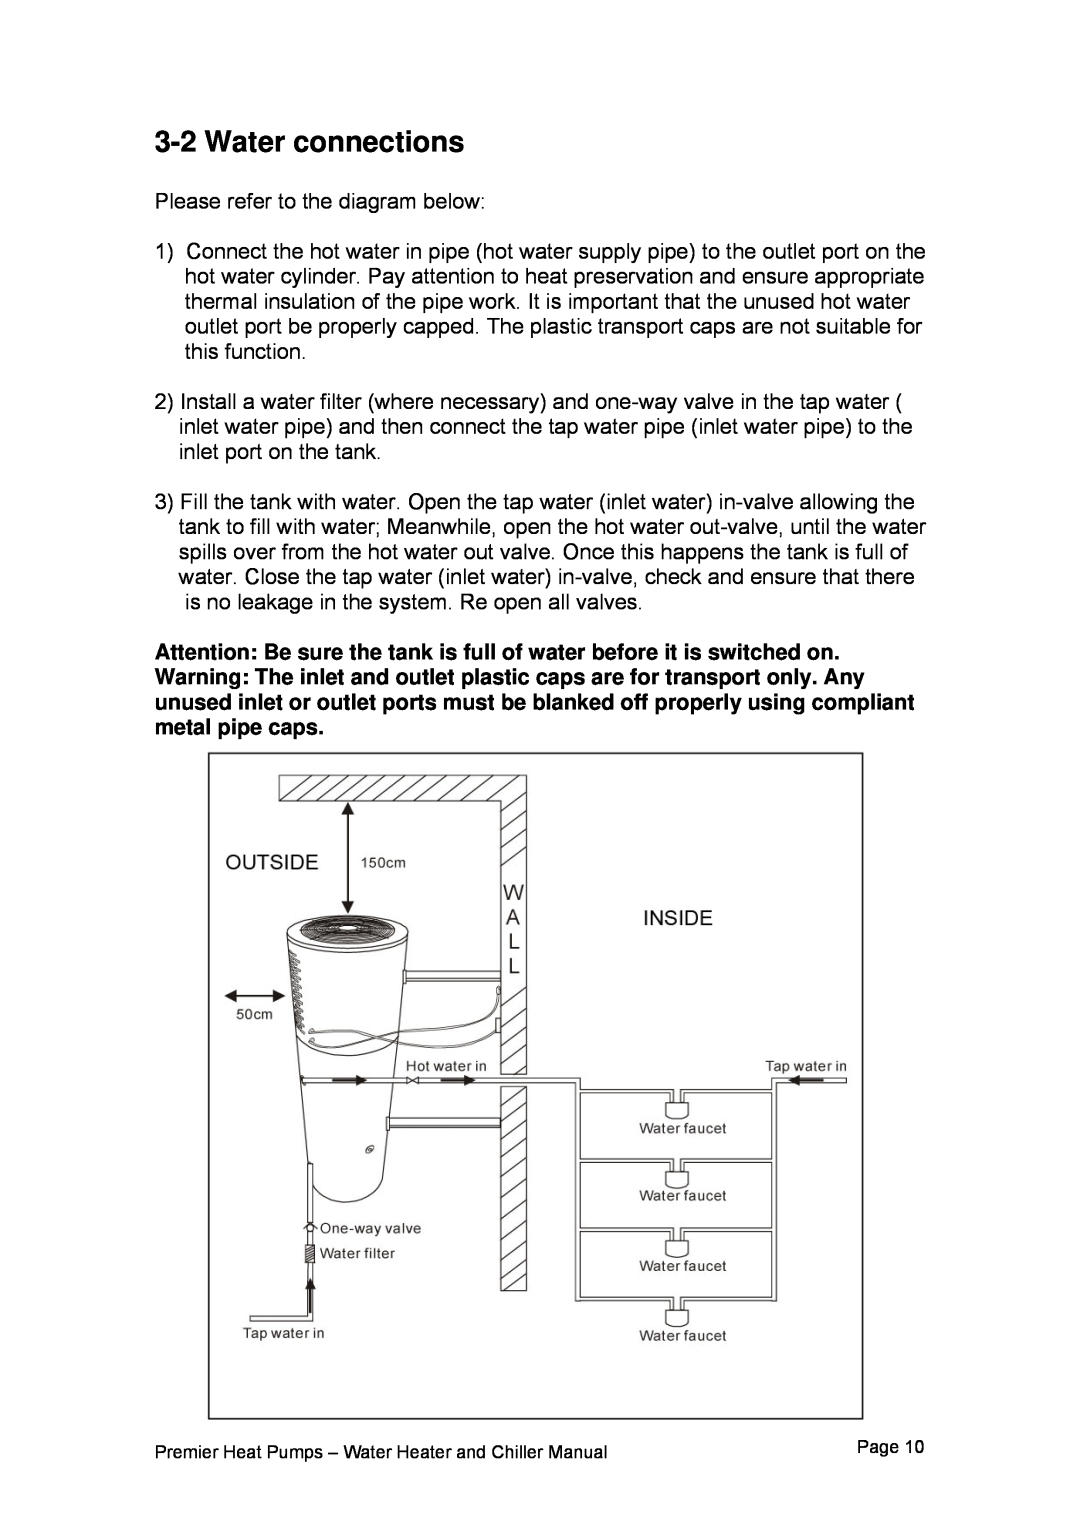 Premier PHP HWC-200, PHP HWC-260, PHP HWC-150 user manual 3-2Water connections 